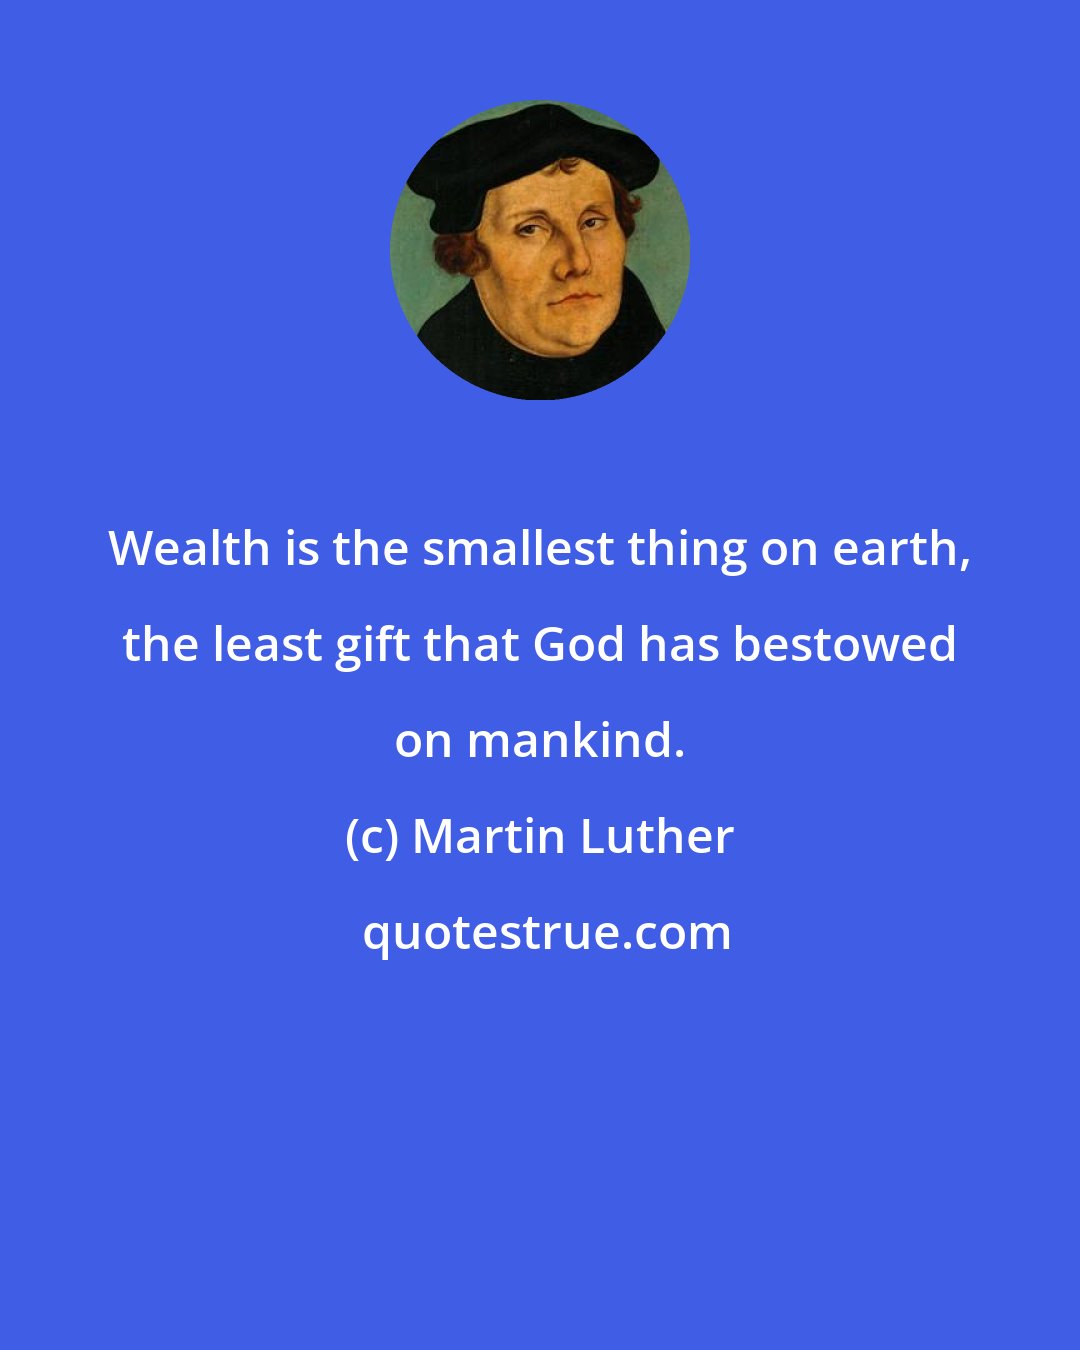 Martin Luther: Wealth is the smallest thing on earth, the least gift that God has bestowed on mankind.